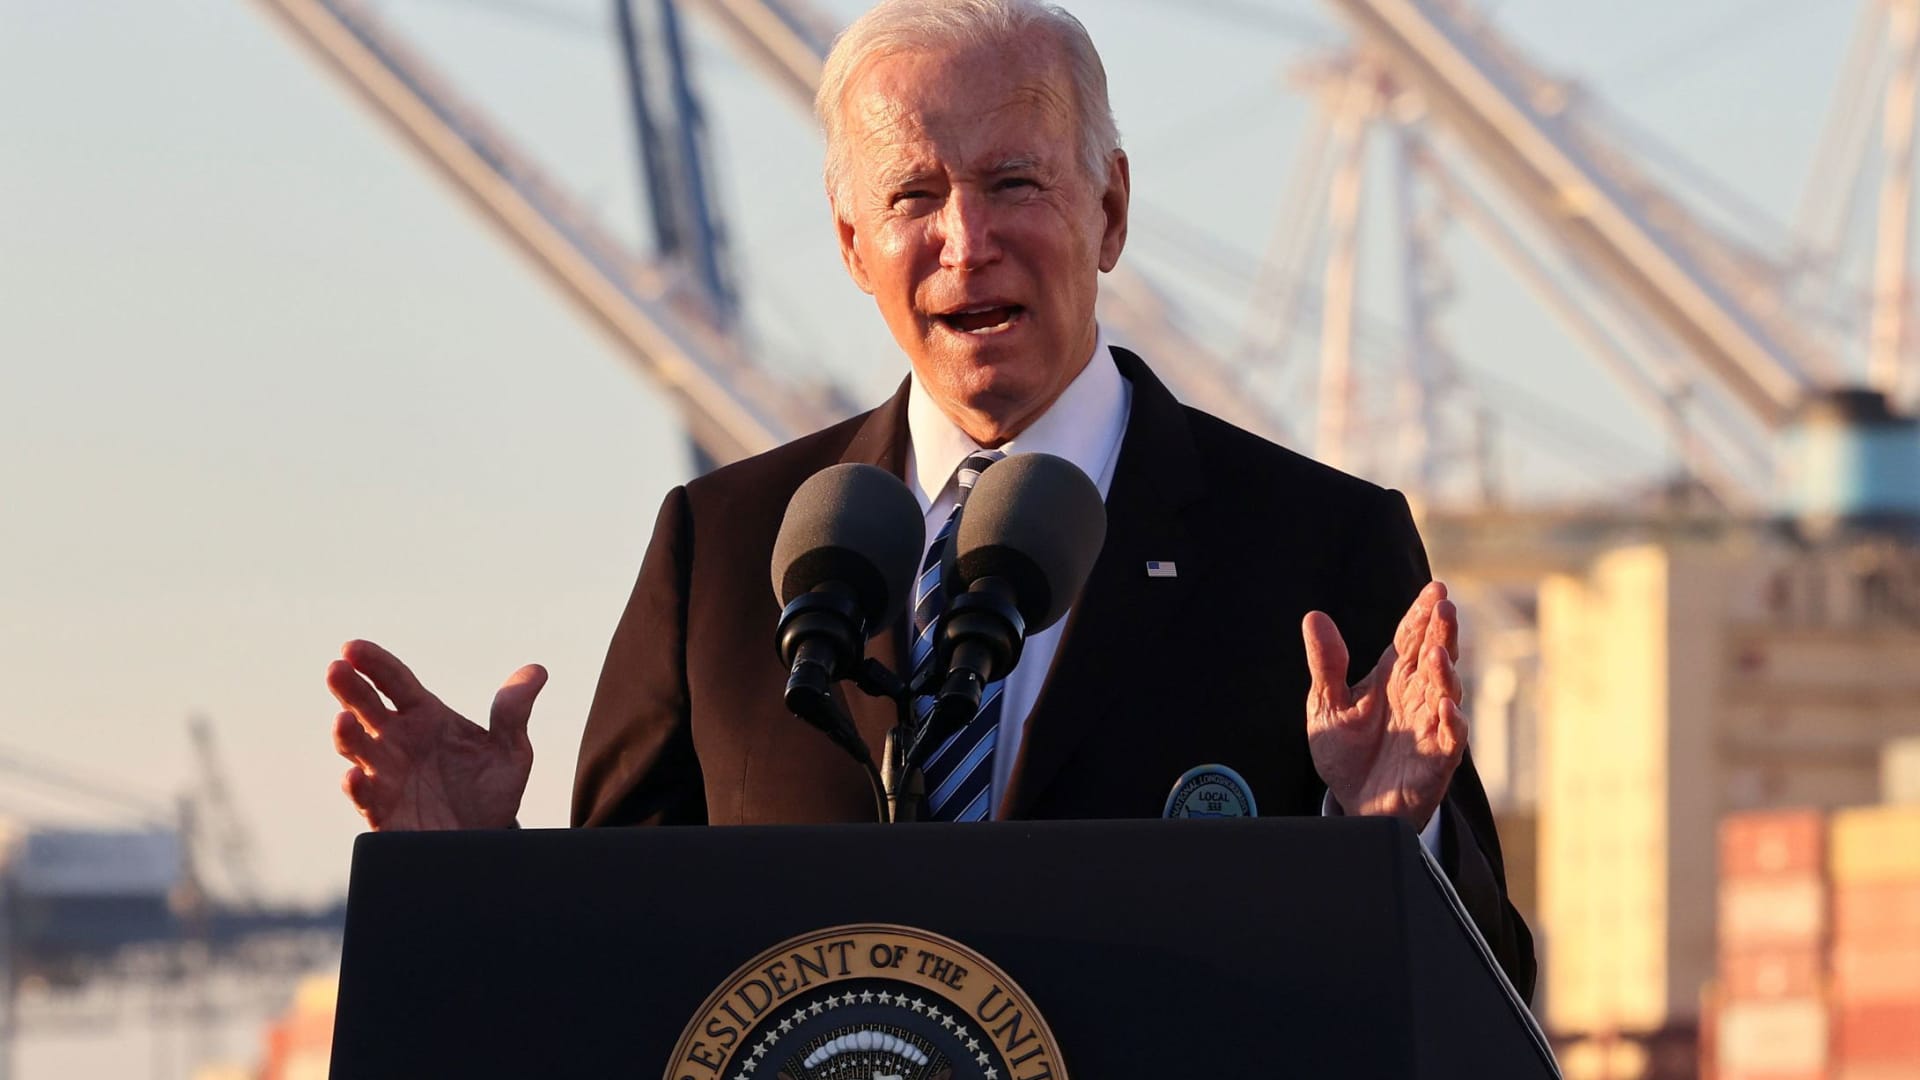 U.S. President Joe Biden delivers a speech during a visit to the Port of Baltimore, Maryland, November 10, 2021.